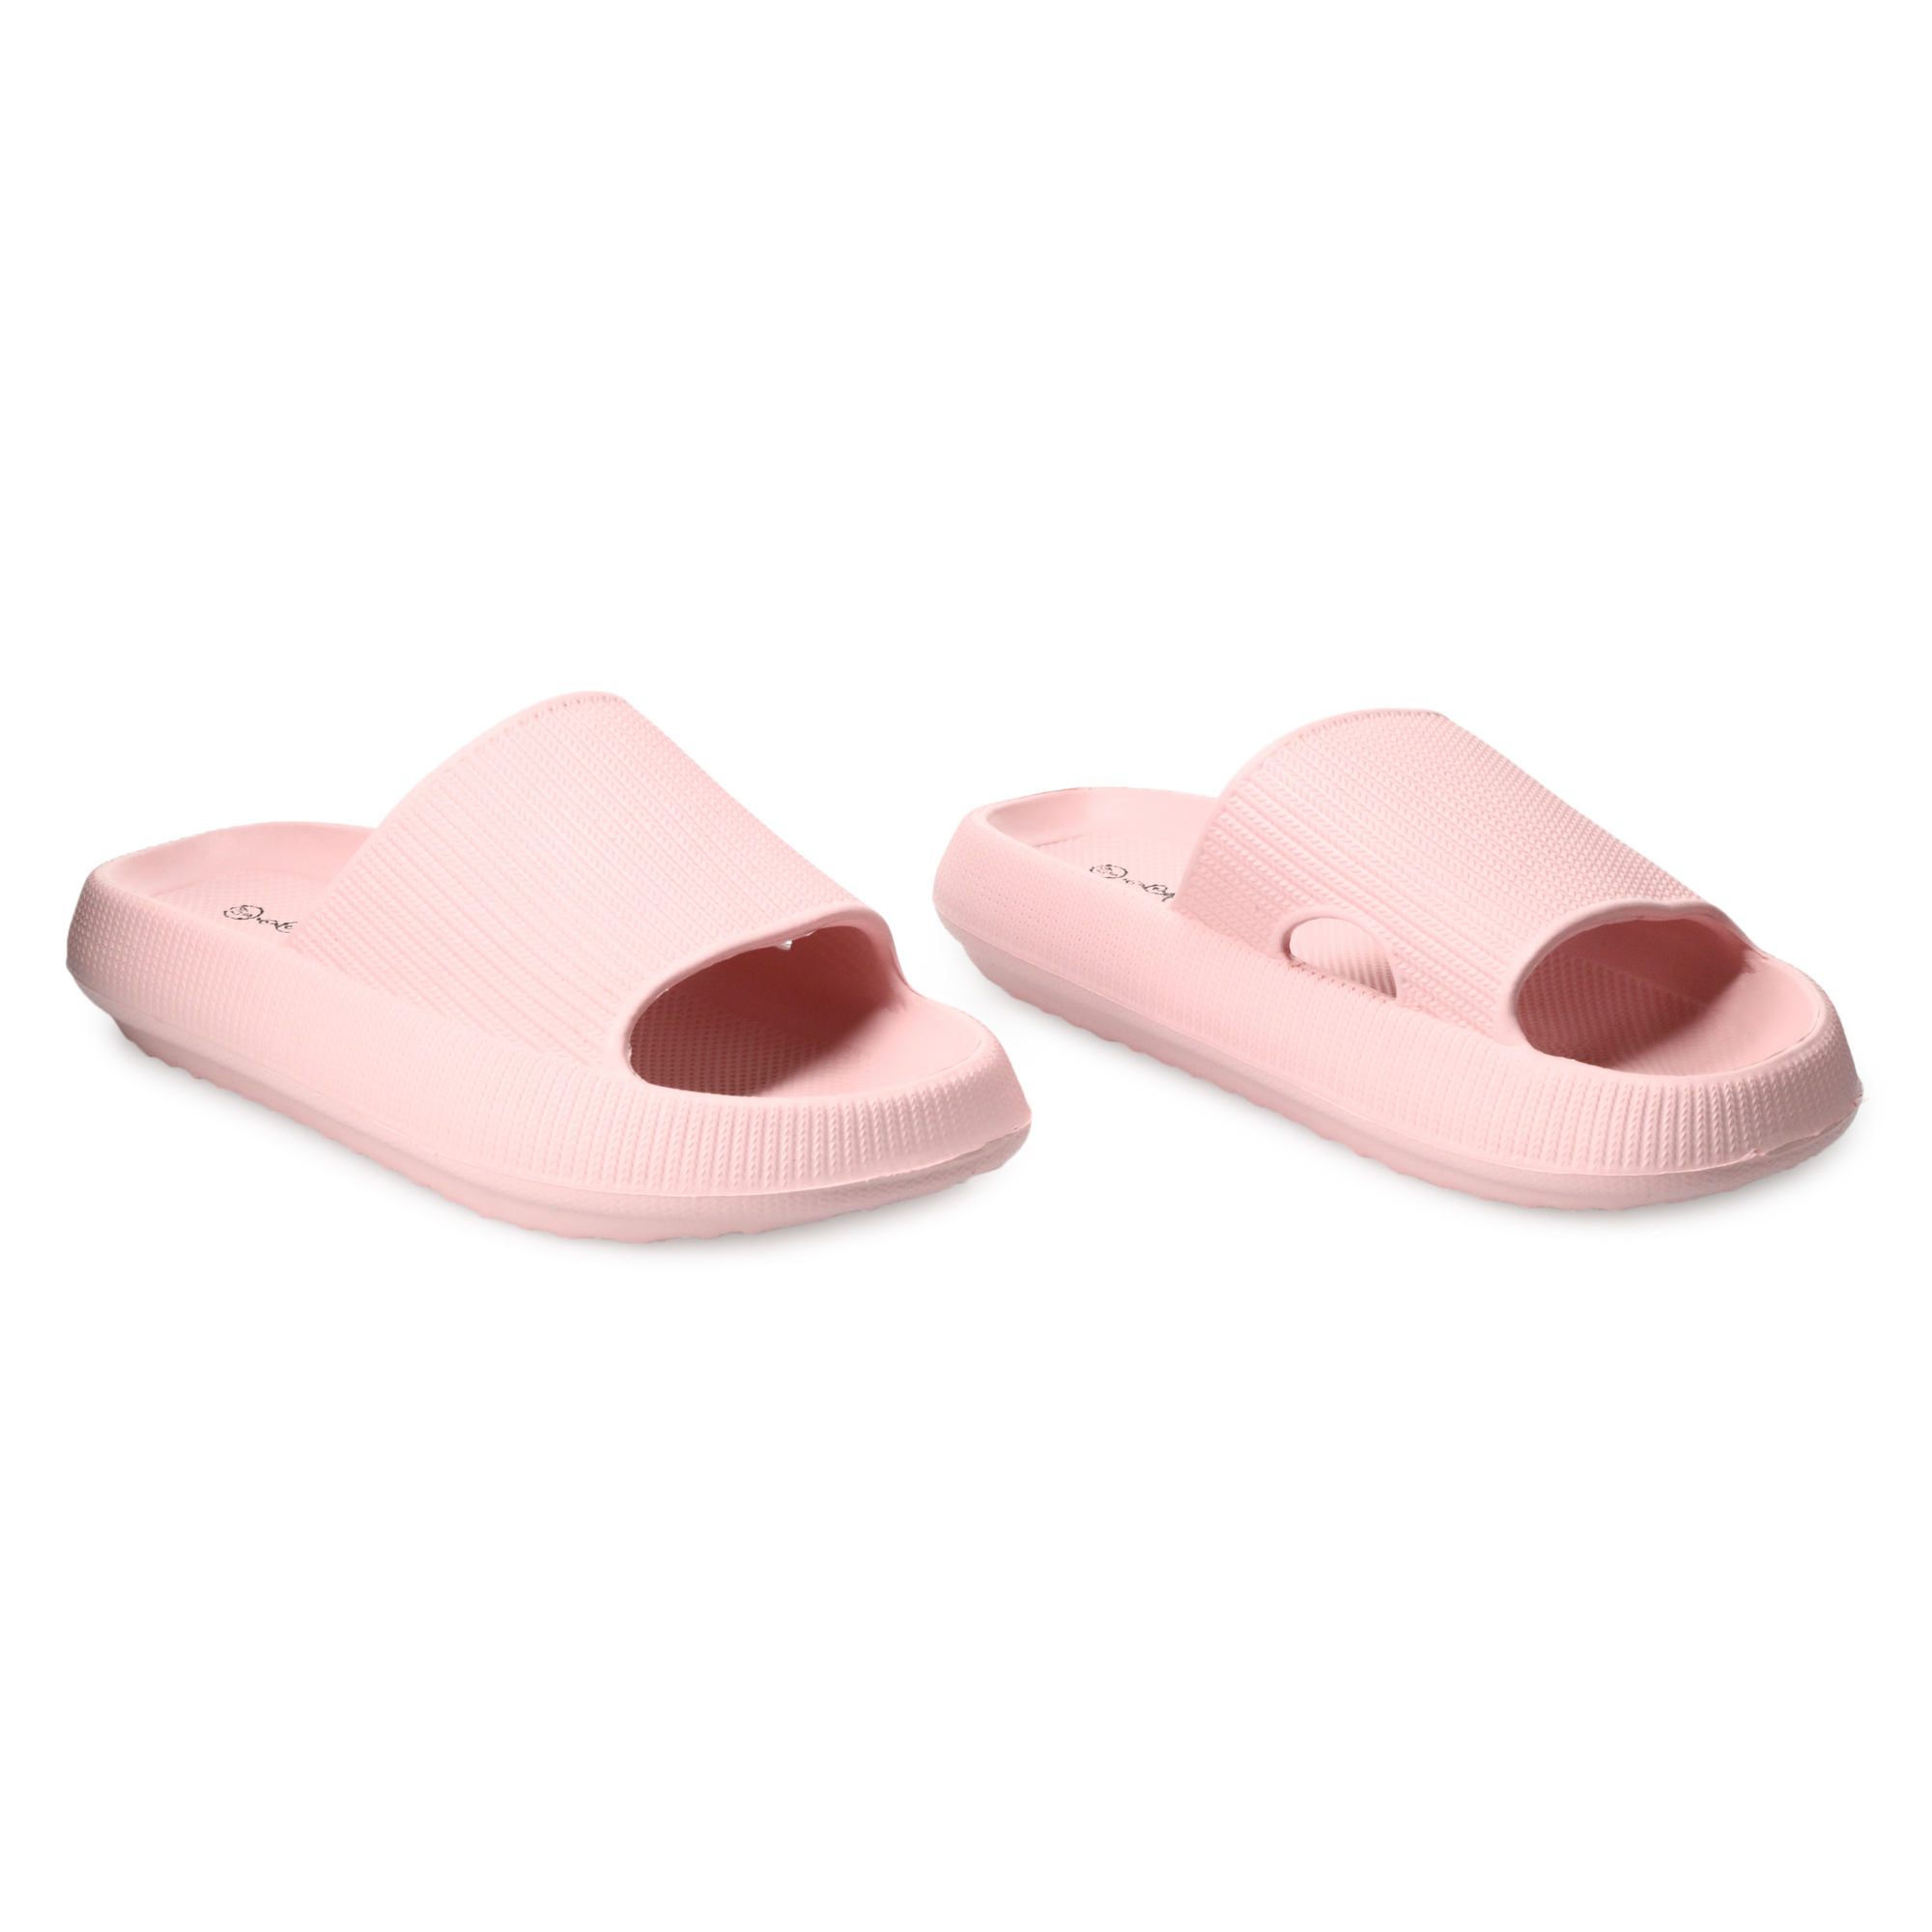 The Pillow Slides - Happy and colorful Saturday💕✨ Do you like neutral or  colorful outfits? Comment below #sandals #colorful #slides #shoes #pink  #wearpink #fashion #ootd #saturdayvibes #goodvibes #influencer  #pillowslides